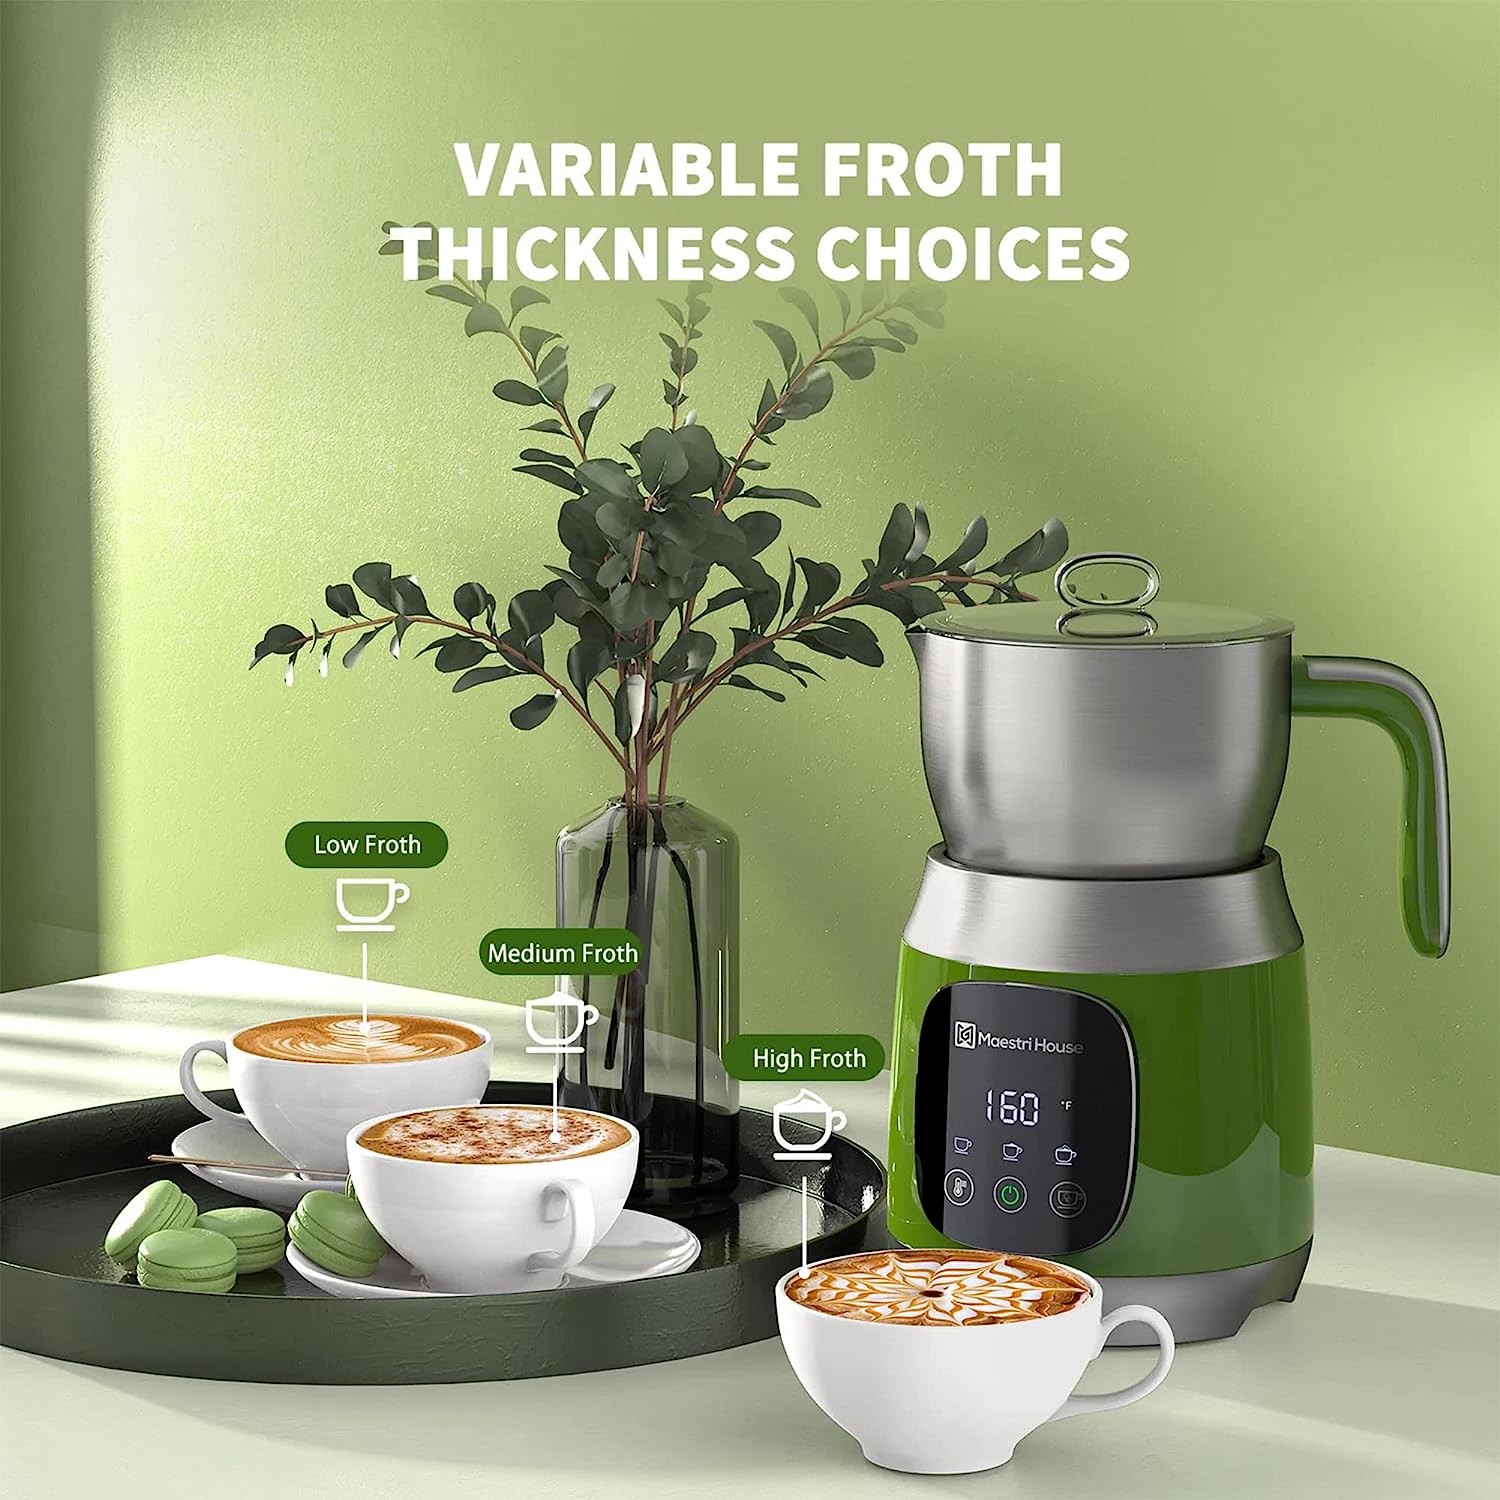 Maestri House MMF-9304-G 21oz Smart Touch Control,Variable Temp and Froth Thickness Detachable Milk Frother Green